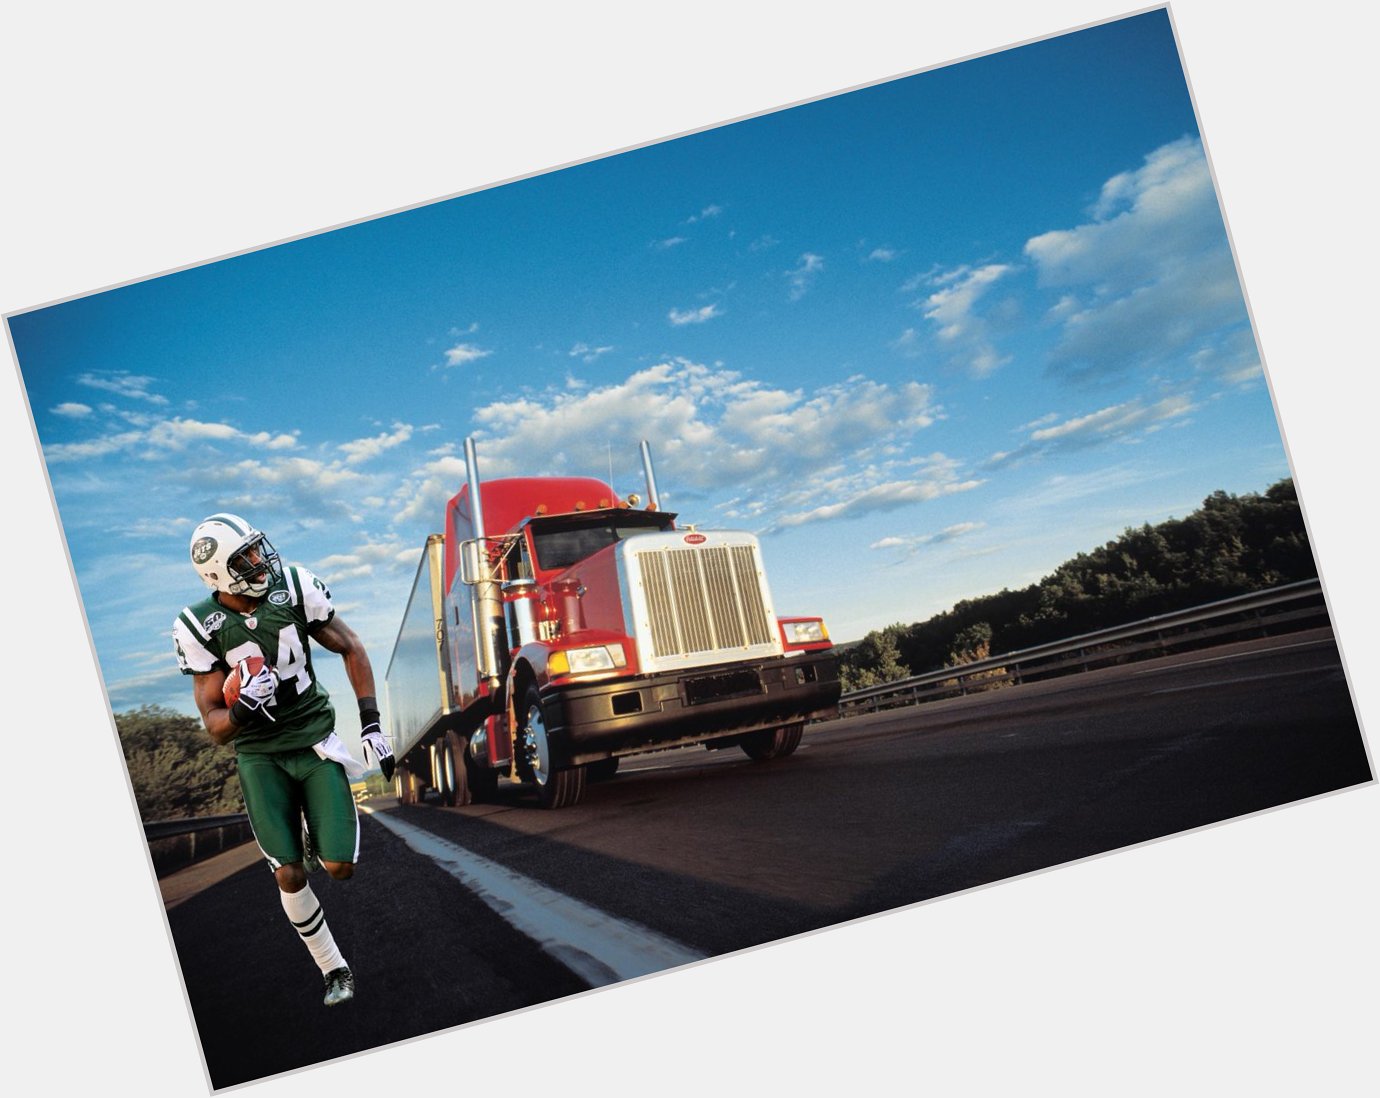 Happy Birthday to Who do you think would be faster? Remessage for the Trucker, Favorite for Darrelle Revis. 